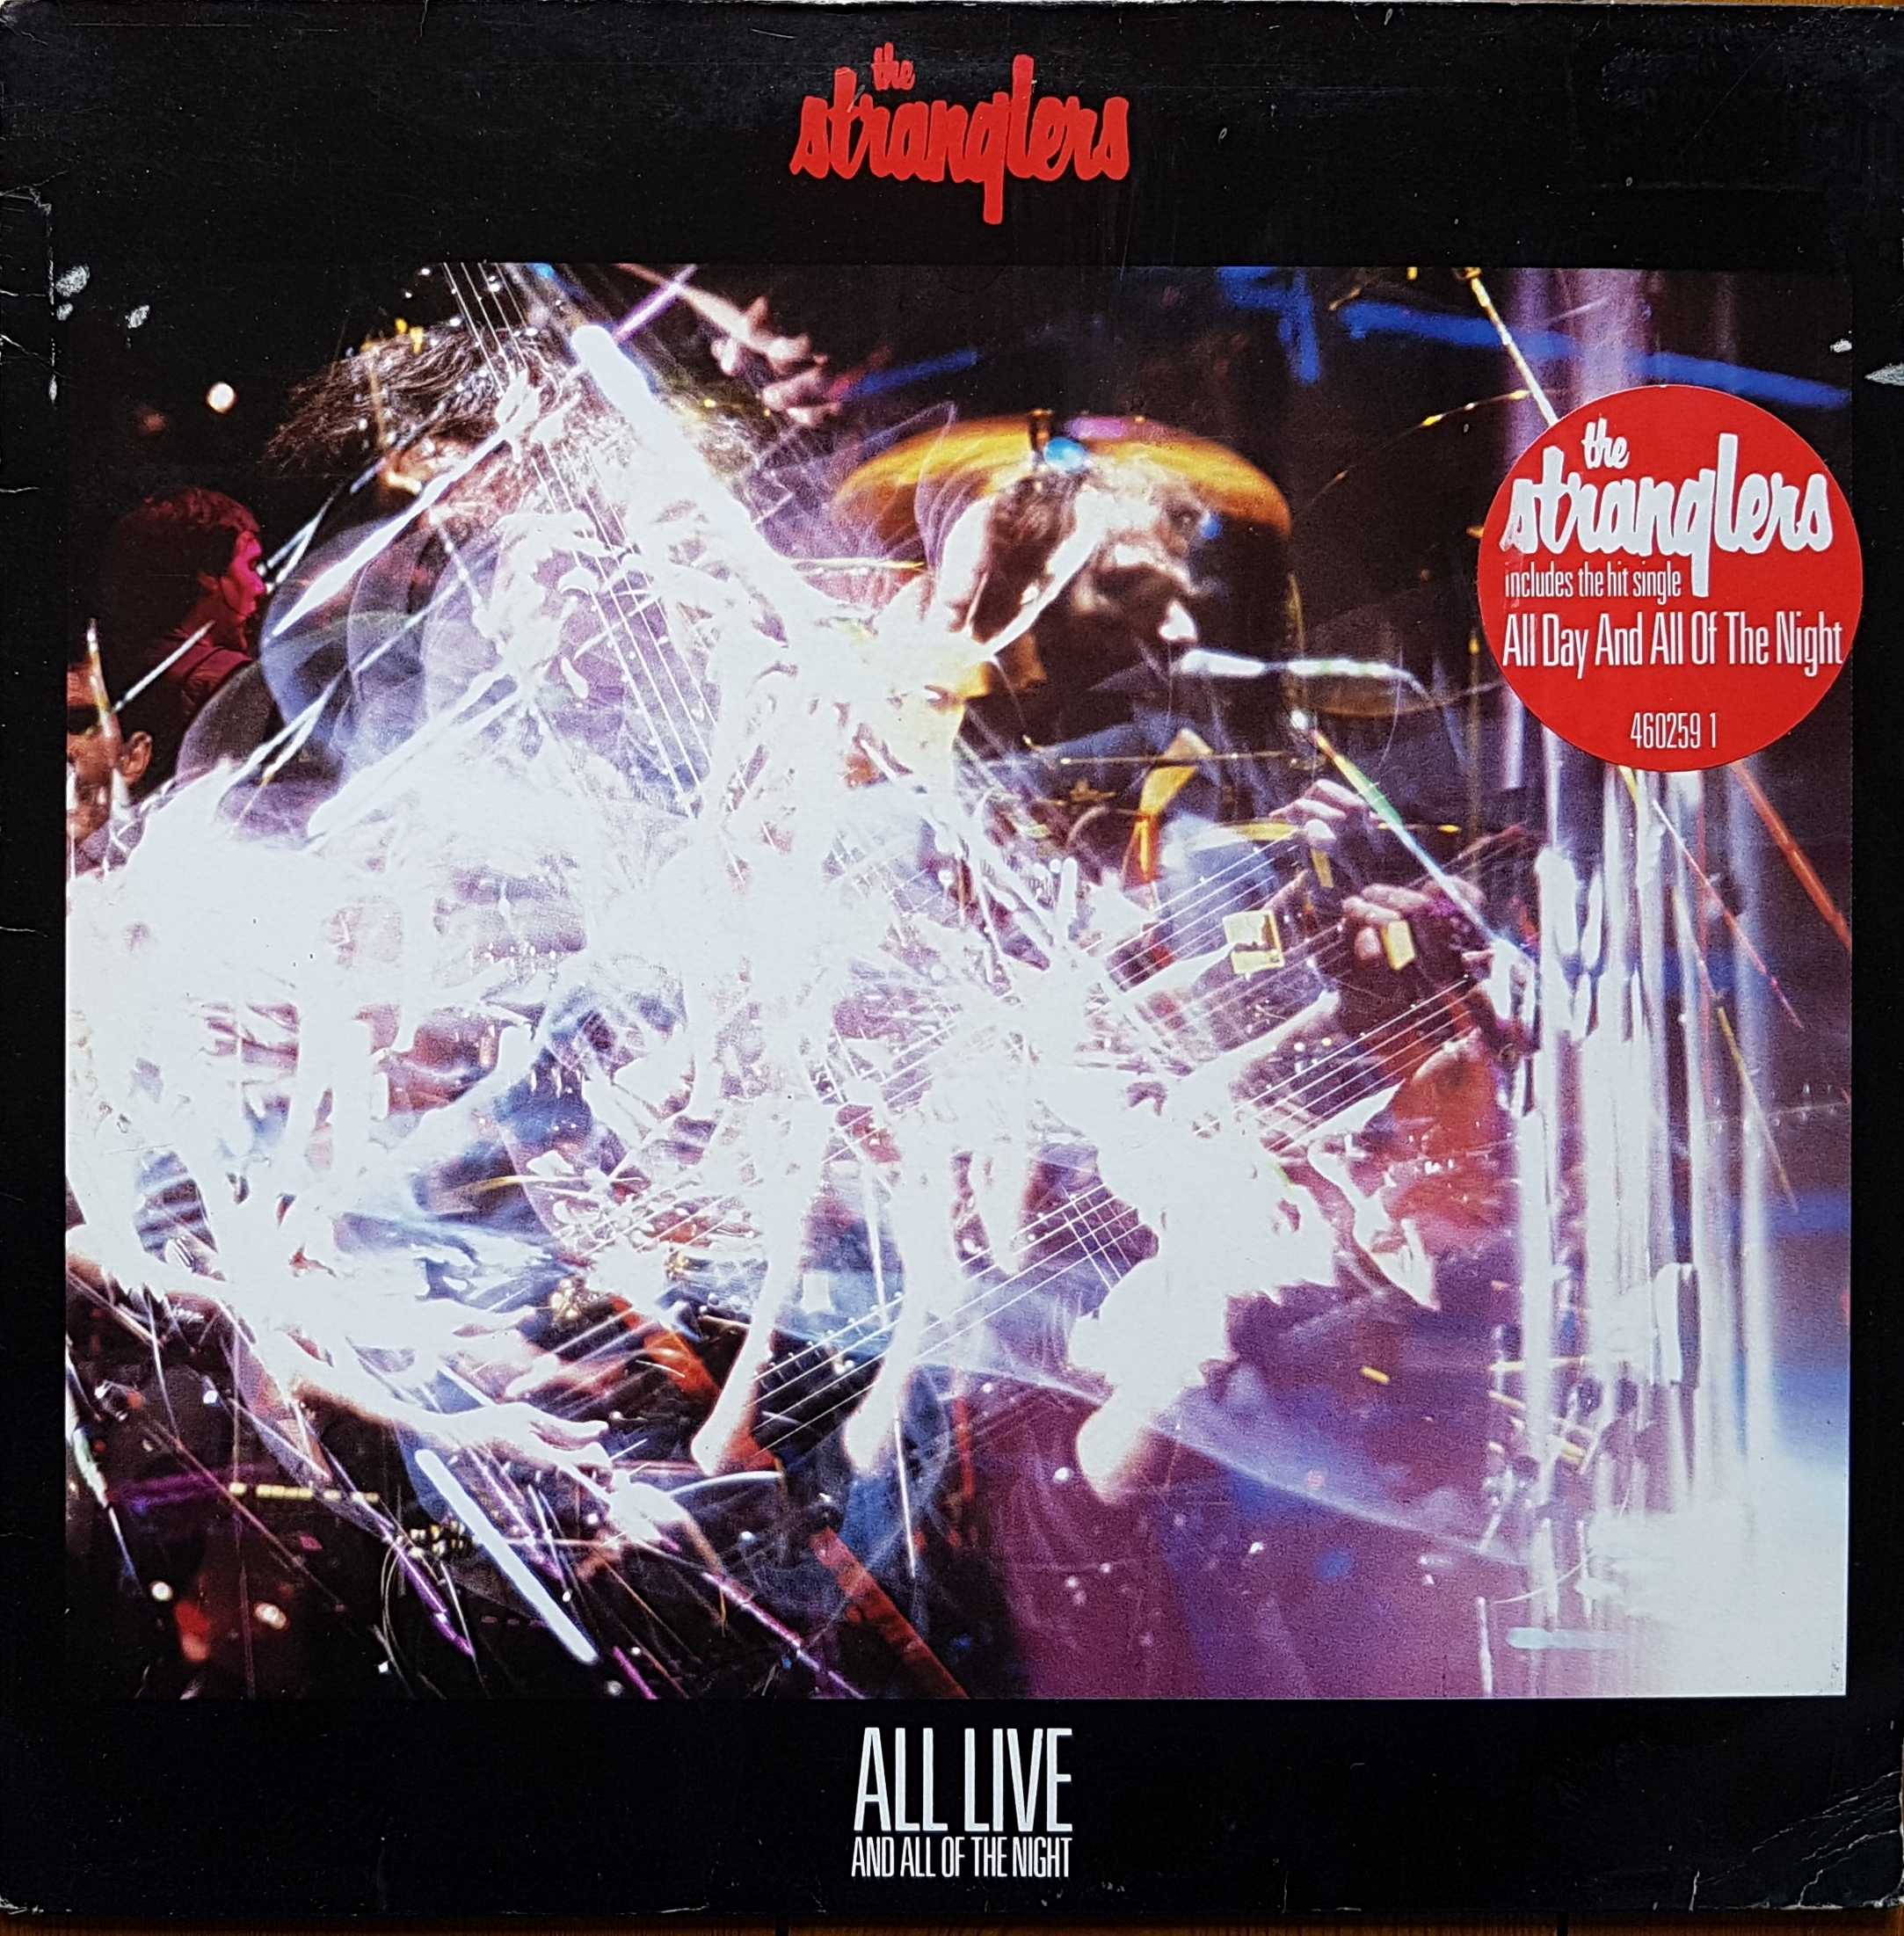 Picture of 460259 1 P All live and all of the night by artist The Stranglers